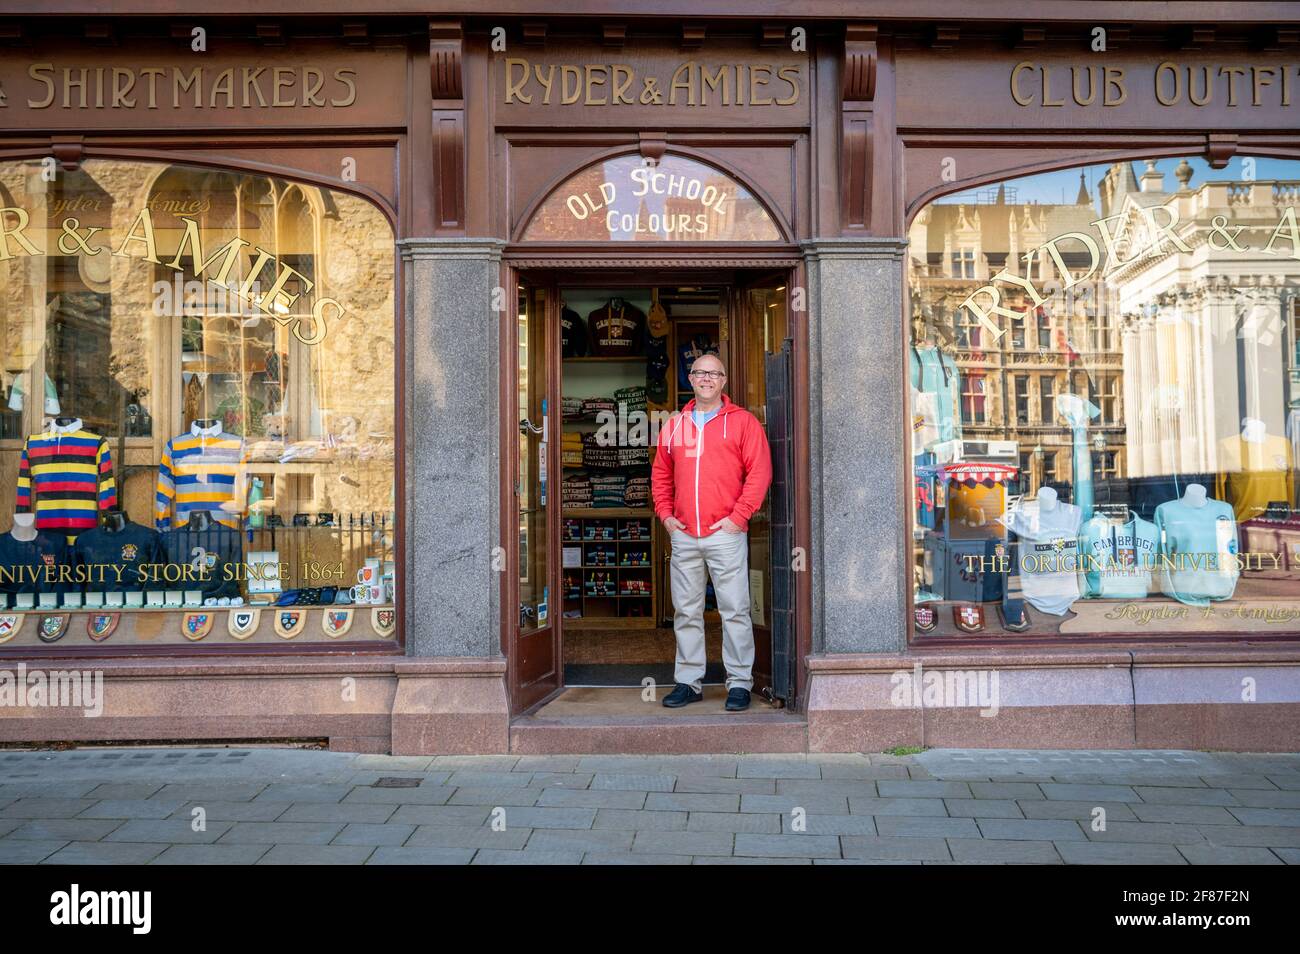 Cambridge, UK. 12th Apr, 2021. The owner of Ryder and Amies a family run specialist University clothing store opens his doors to the public as shops reopen in Cambridge as part of the UK easing of Covid 19 lockdown restrictions. The roadmap allows opening of non essential shops across England today. It was a relatively quiet start to the morning as shoppers returned to high Street retail outlets. Credit: Julian Eales/Alamy Live News Stock Photo